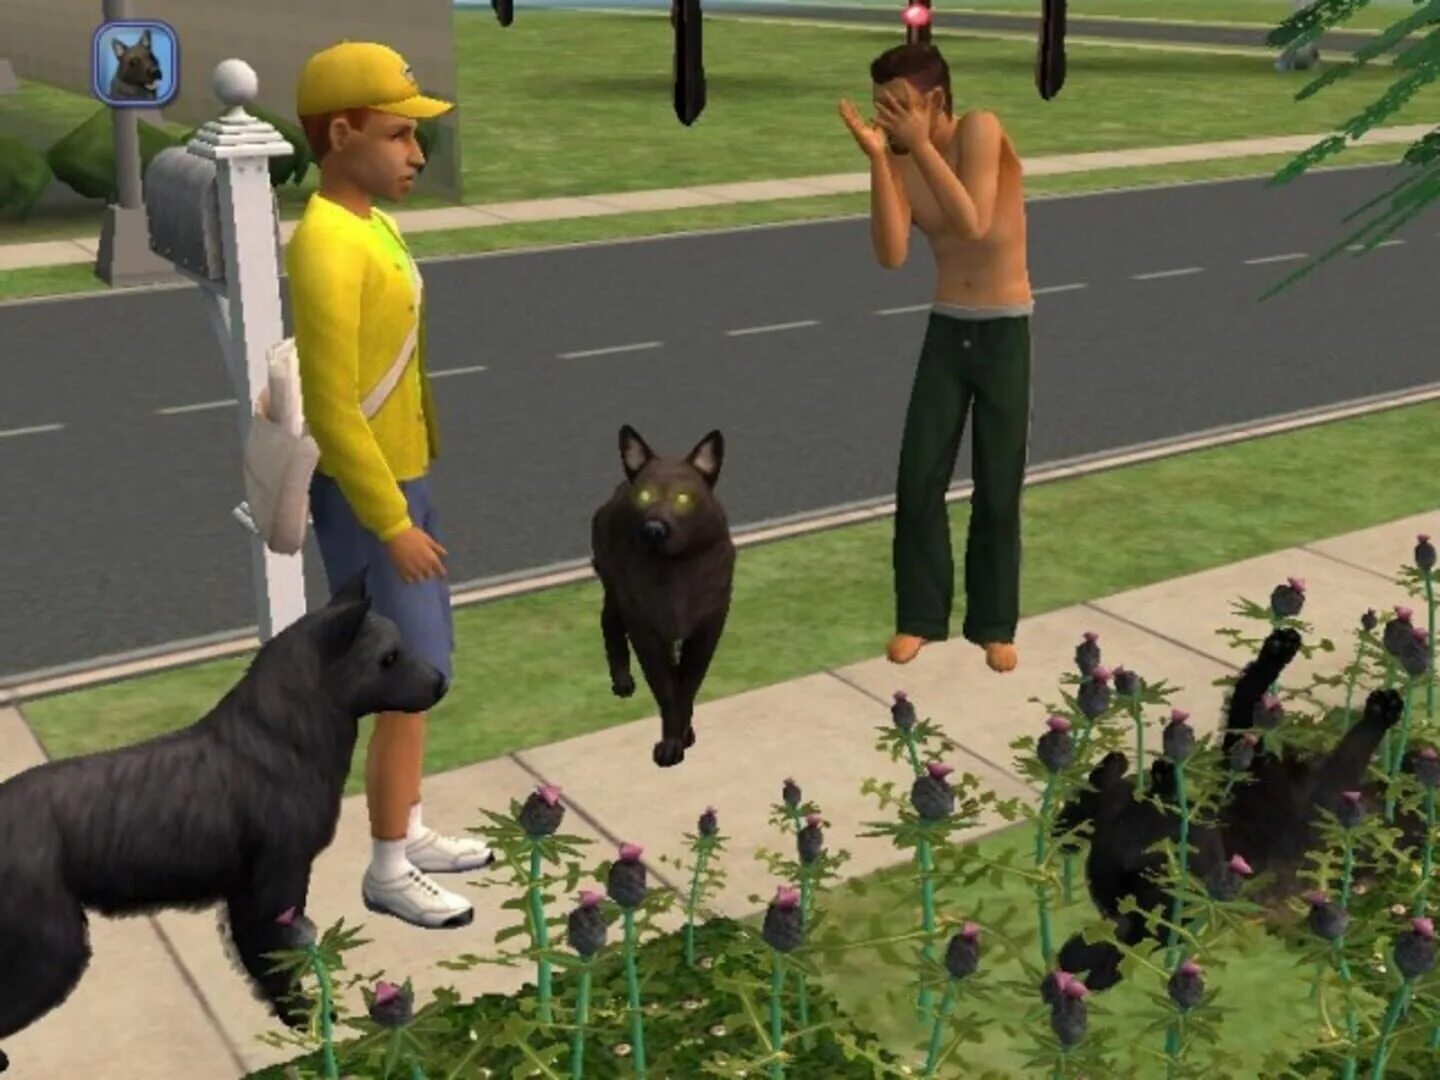 The SIMS 2: питомцы. SIMS 2 Pets. SIMS 2 питомцы Алиса. Симс 2 питомцы Вебер.